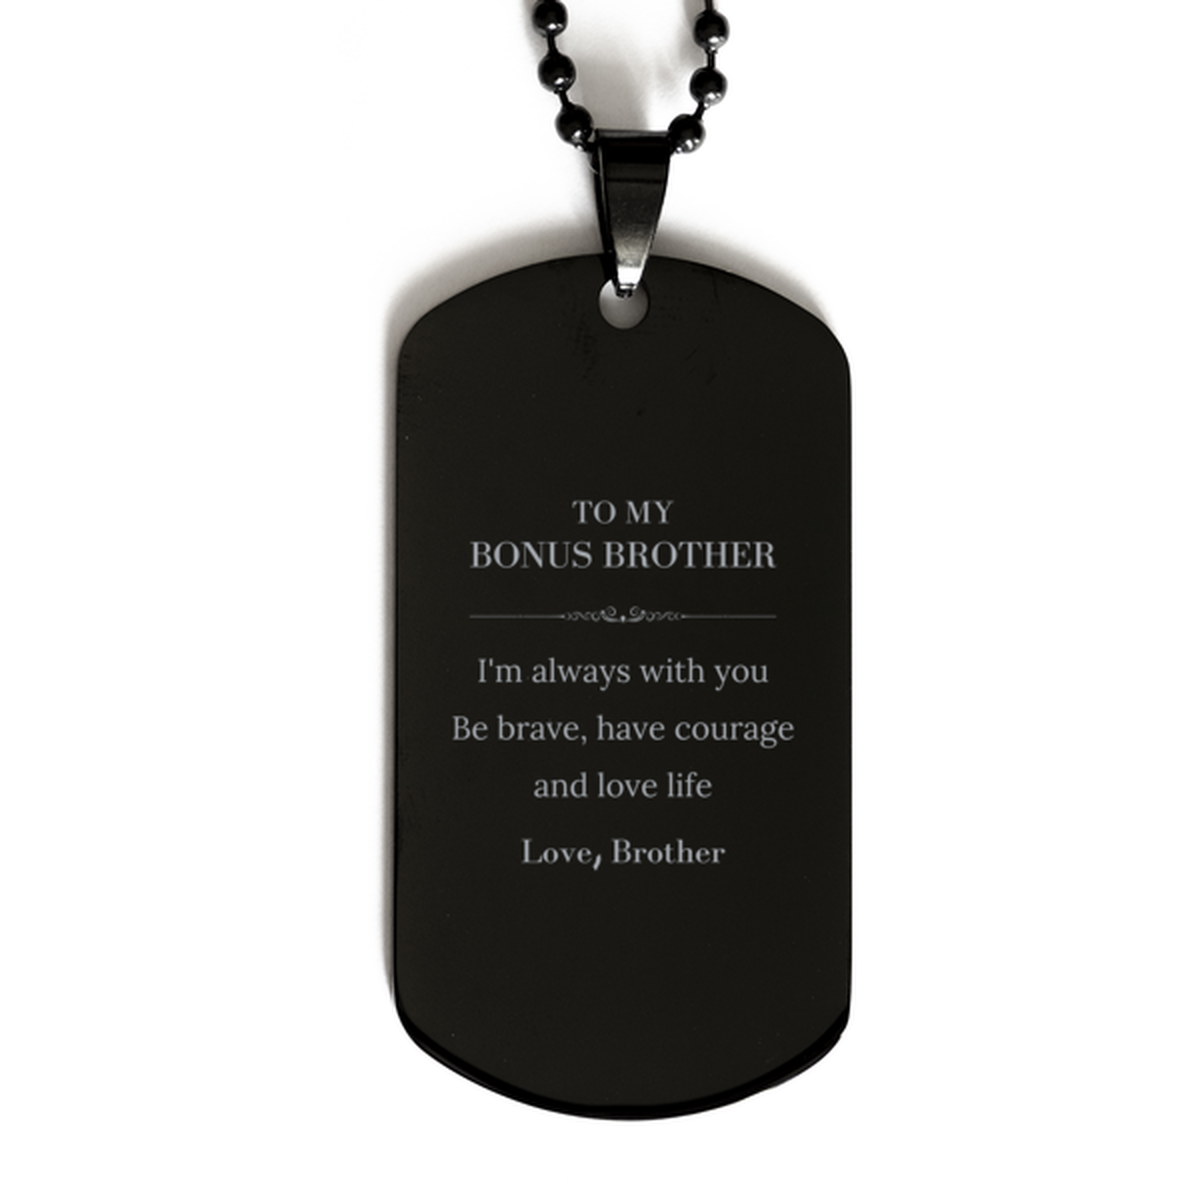 To My Bonus Brother Gifts from Brother, Unique Black Dog Tag Inspirational Christmas Birthday Graduation Gifts for Bonus Brother I'm always with you. Be brave, have courage and love life. Love, Brother